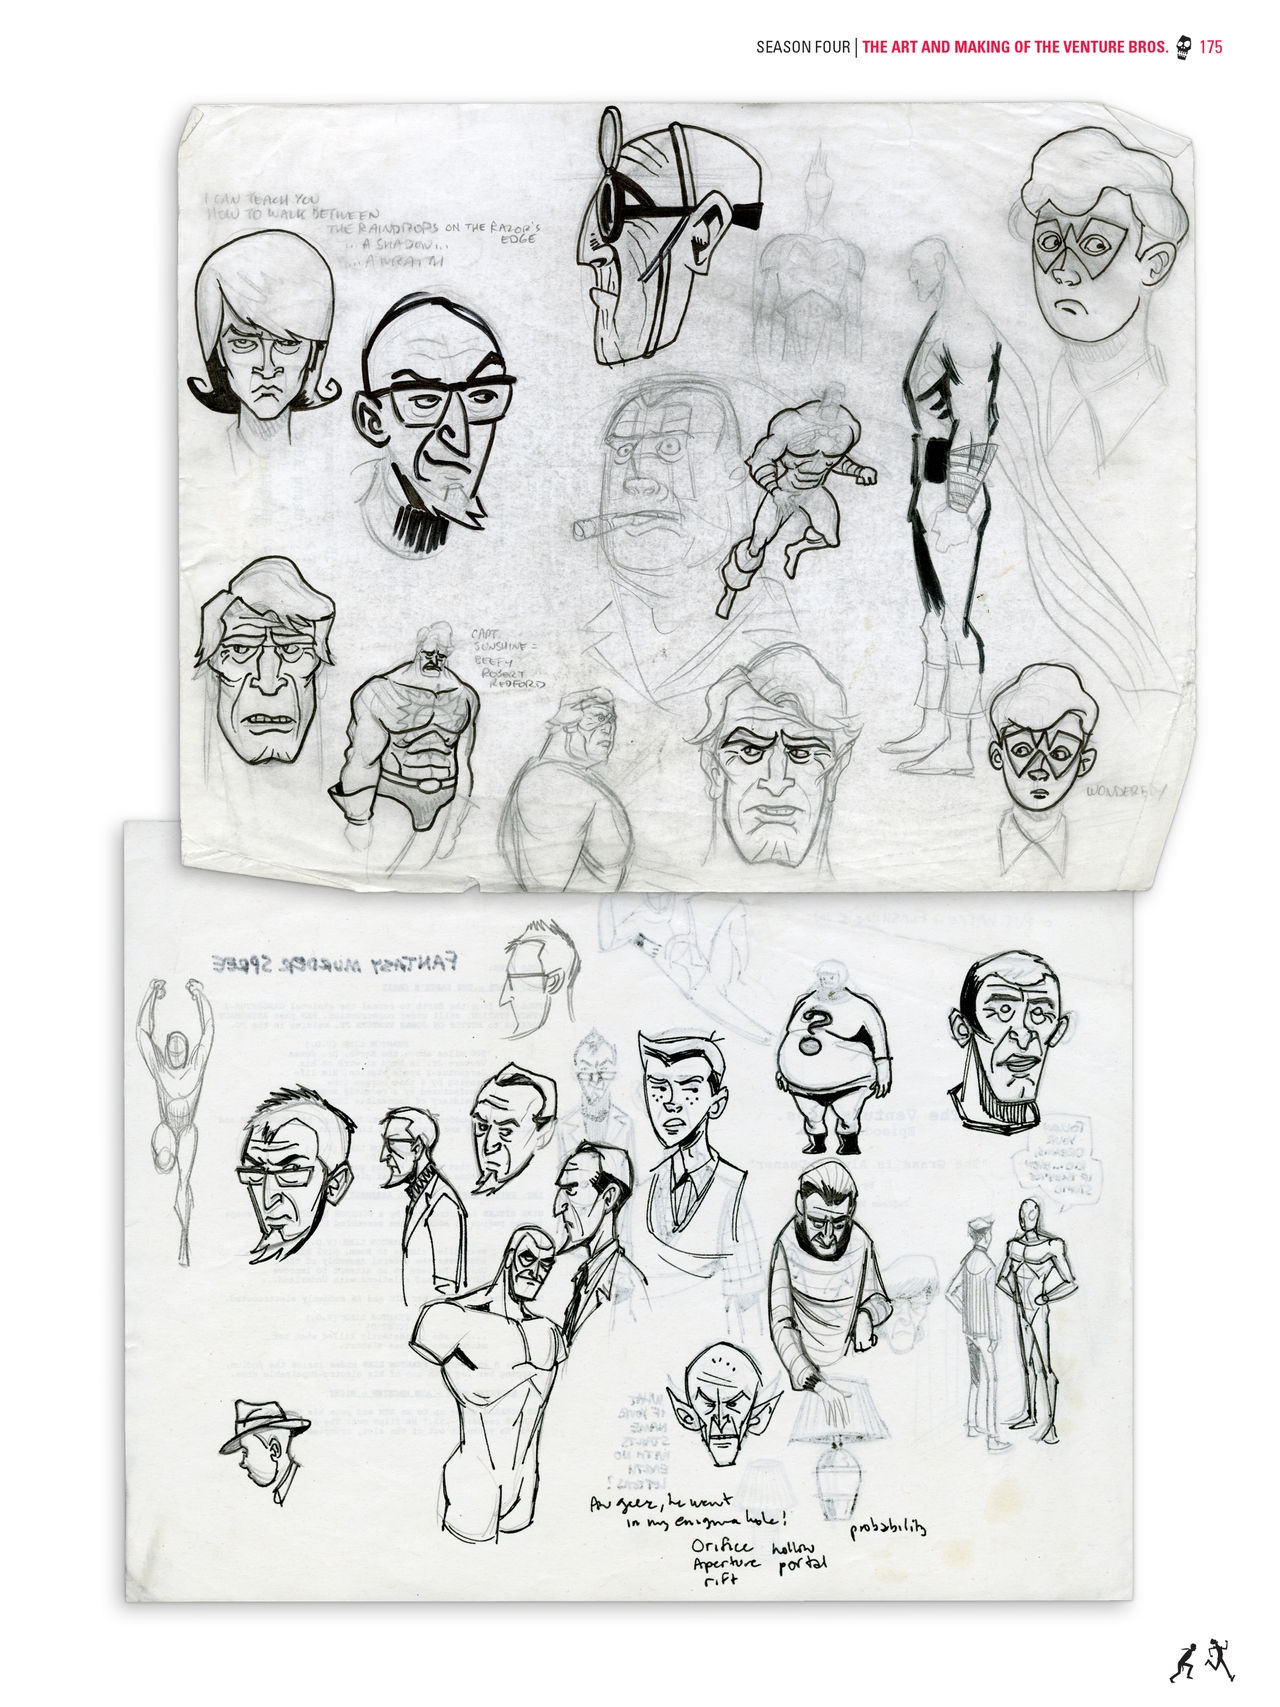 Go Team Venture! - The Art and Making of the Venture Bros 173